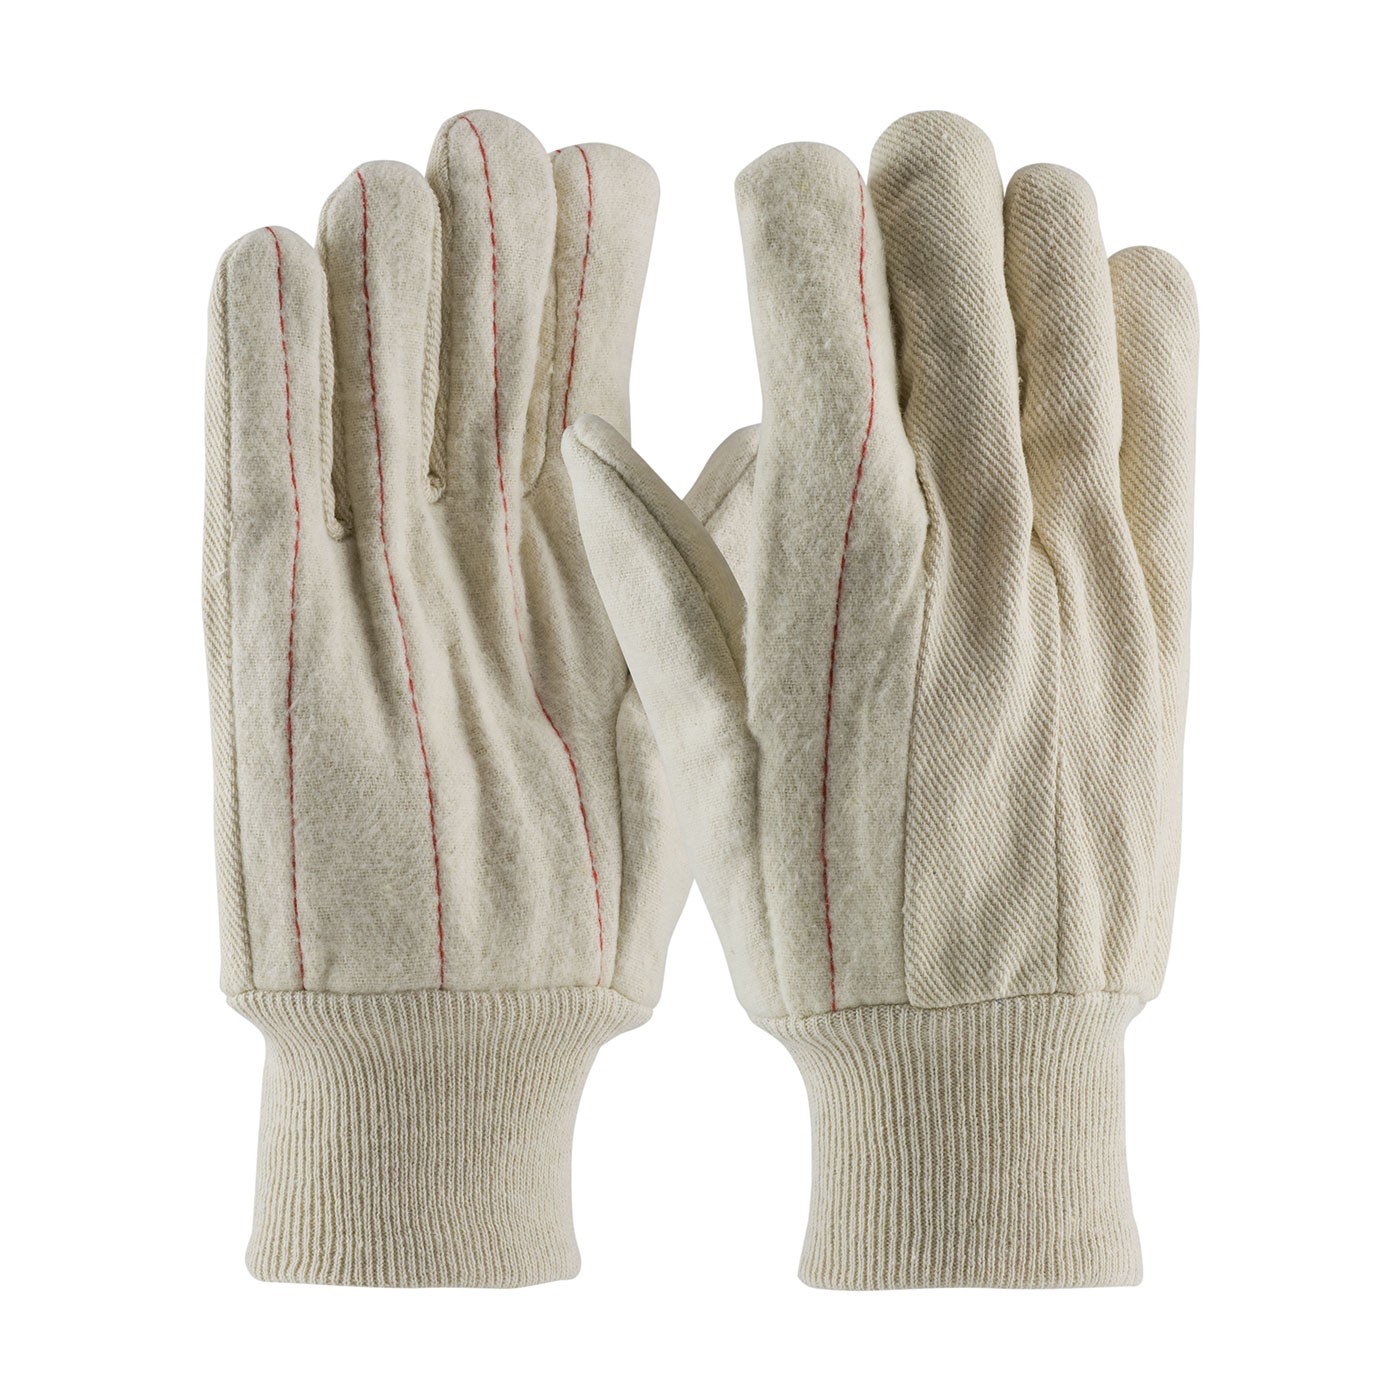 PIP® Cotton Canvas Double Palm Glove with Nap-out Finish - Knit wrist  (#92-918O)